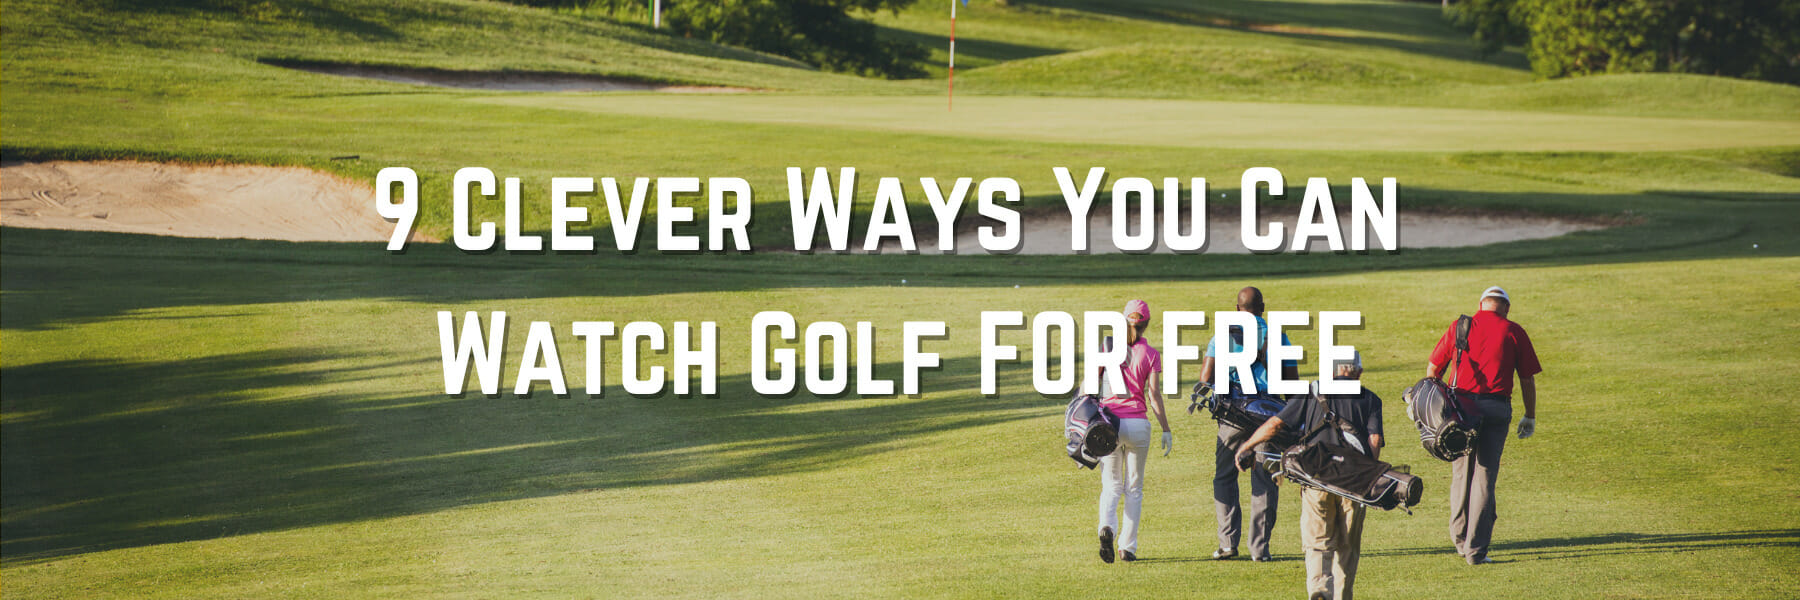 9 Clever Ways You Can Watch Golf FOR FREE